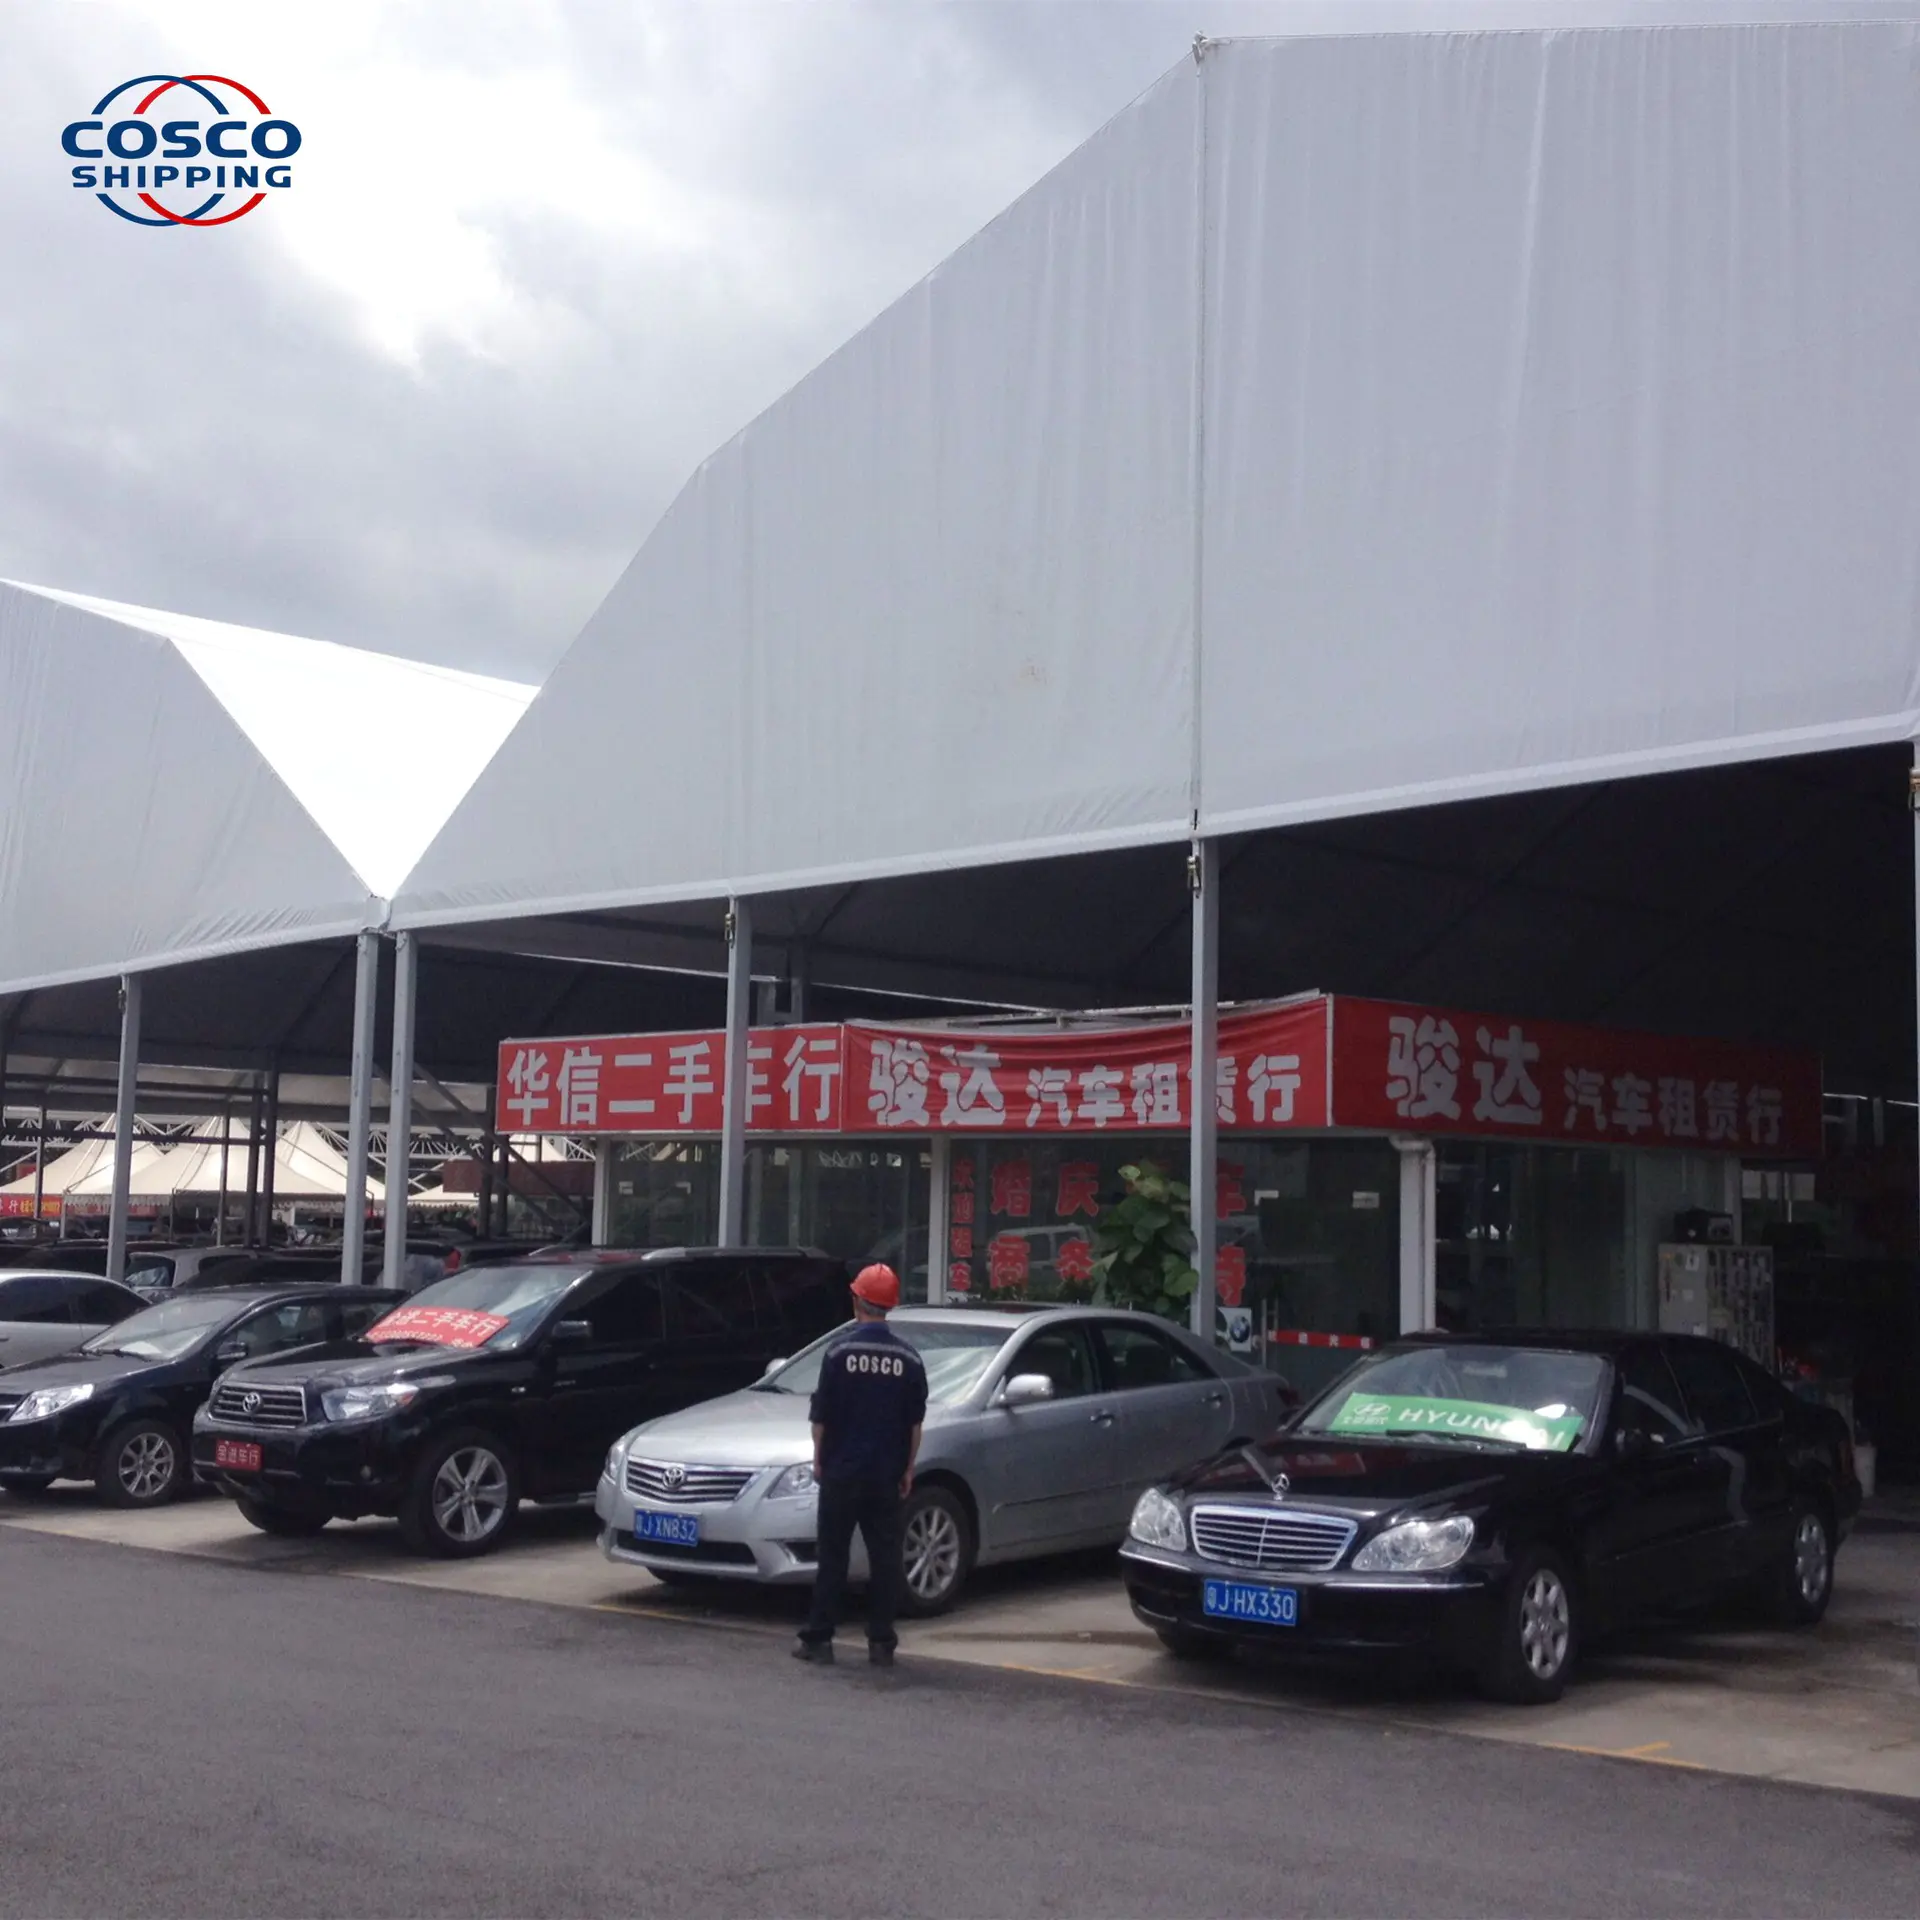 COSCO Large Aluminum Heavy-Duty Event Tent for Exhibition Trade Show Warehouse